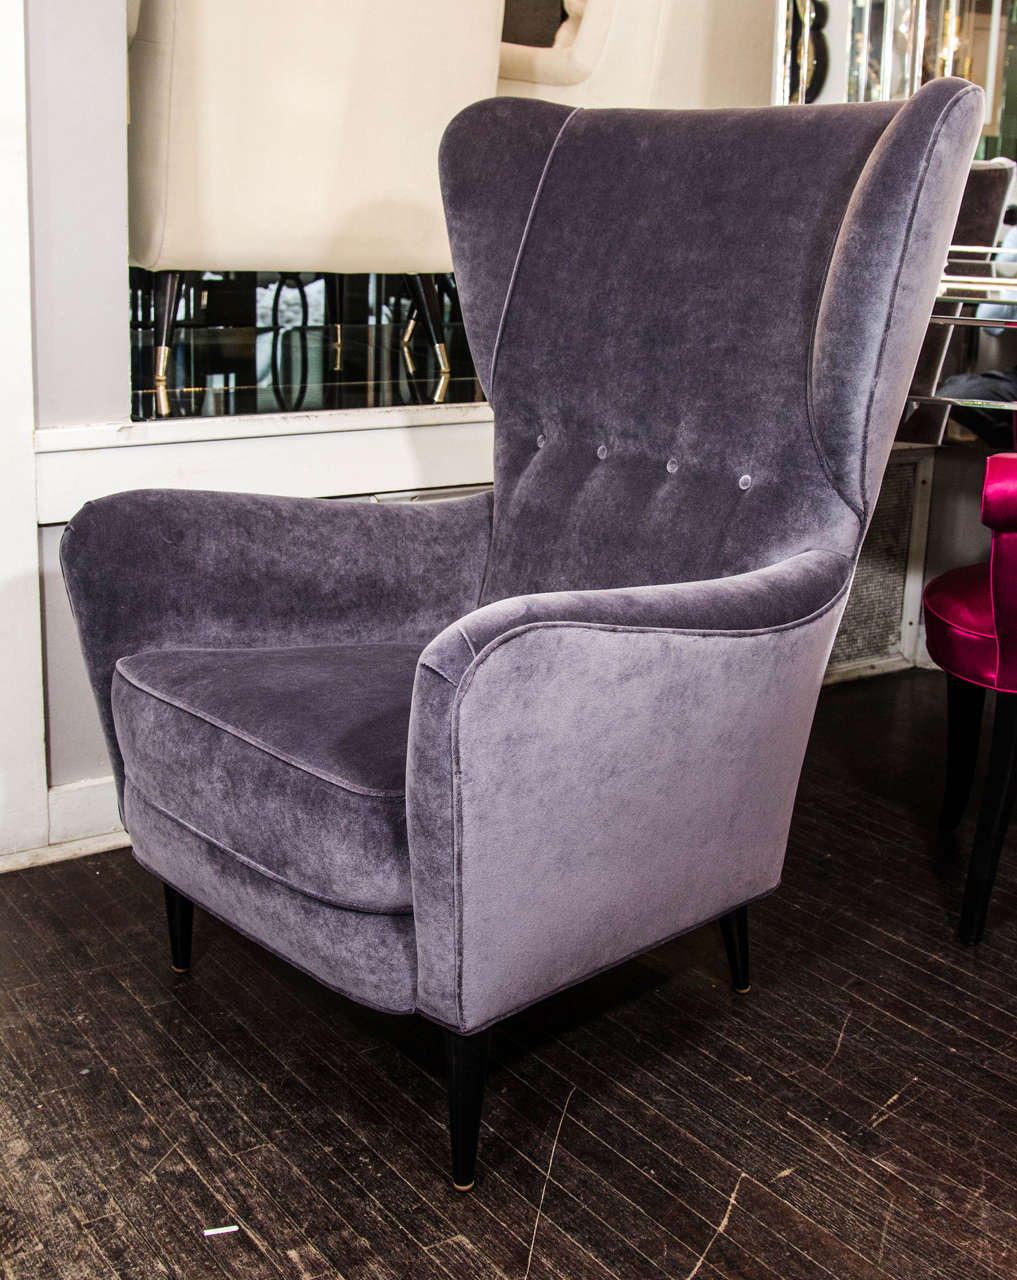 Paolo Buffa chair re-upholstered in smokey grey velvet